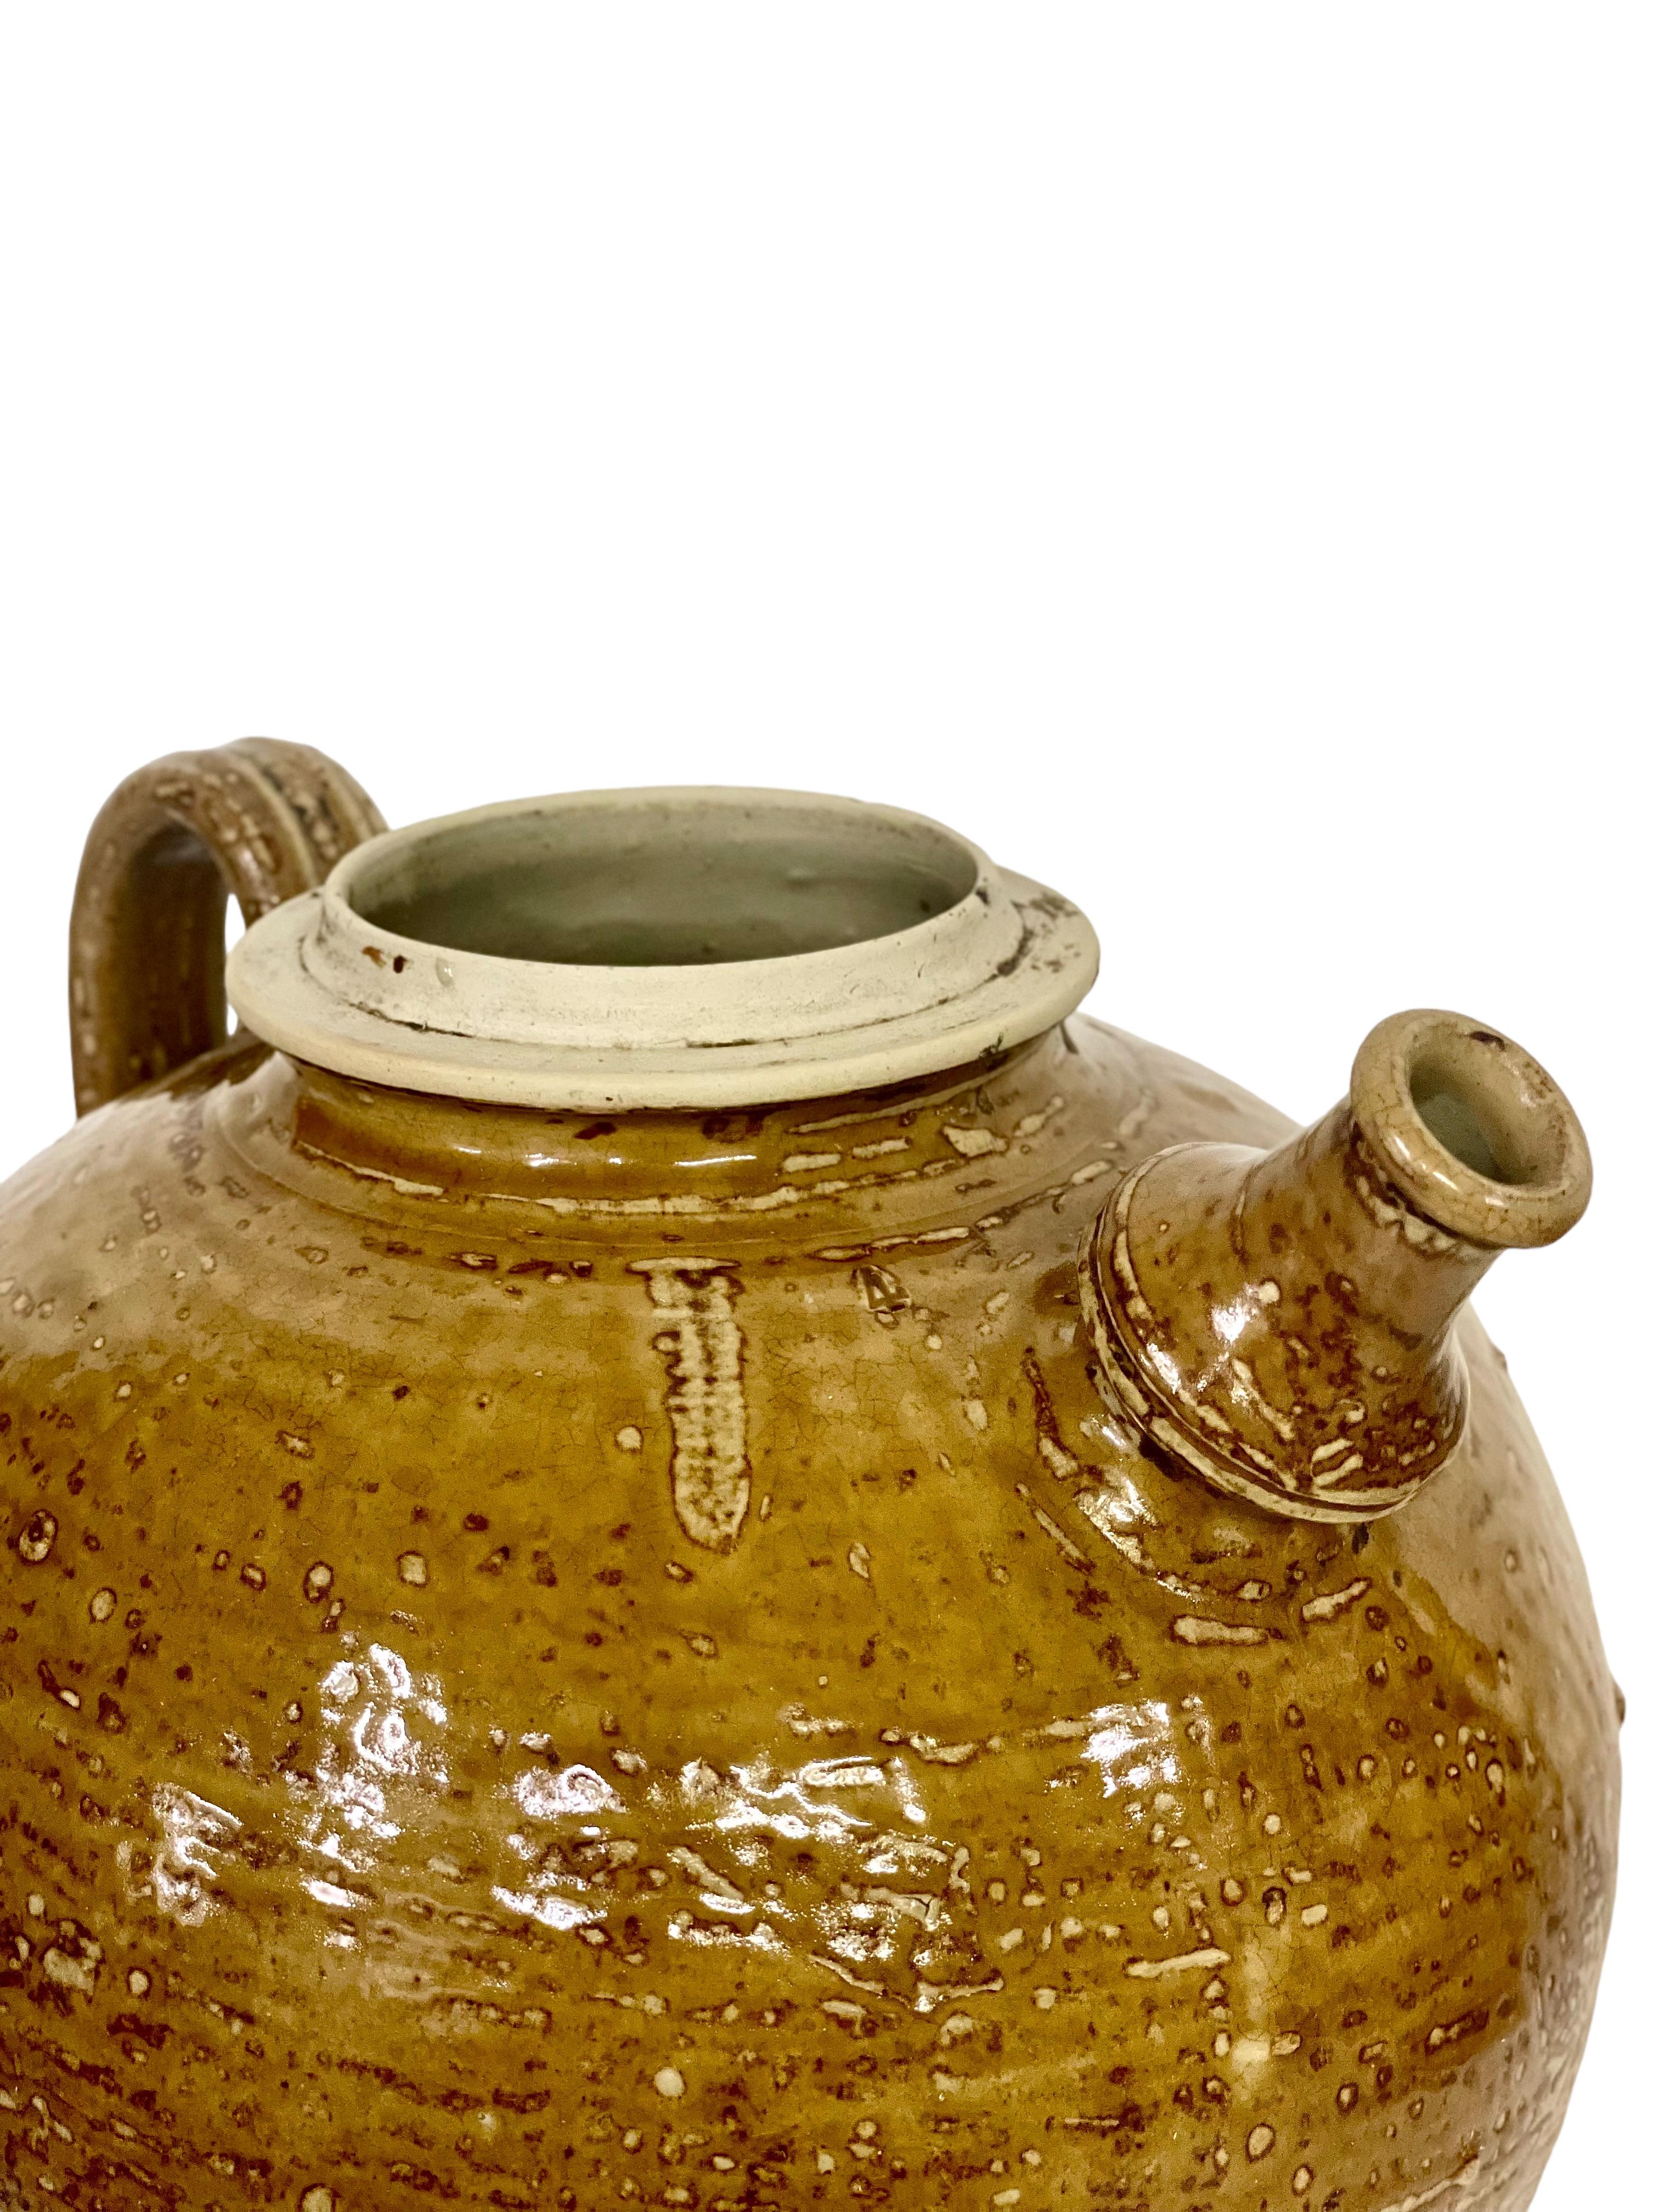 This lovely rounded 19th century walnut oil jar has an interestingly shaped spout and elegant side handle and would have once been used for the storage and pouring of walnut or olive oil. Glazed in a wonderful glossy yellow-brown earthy glaze, this